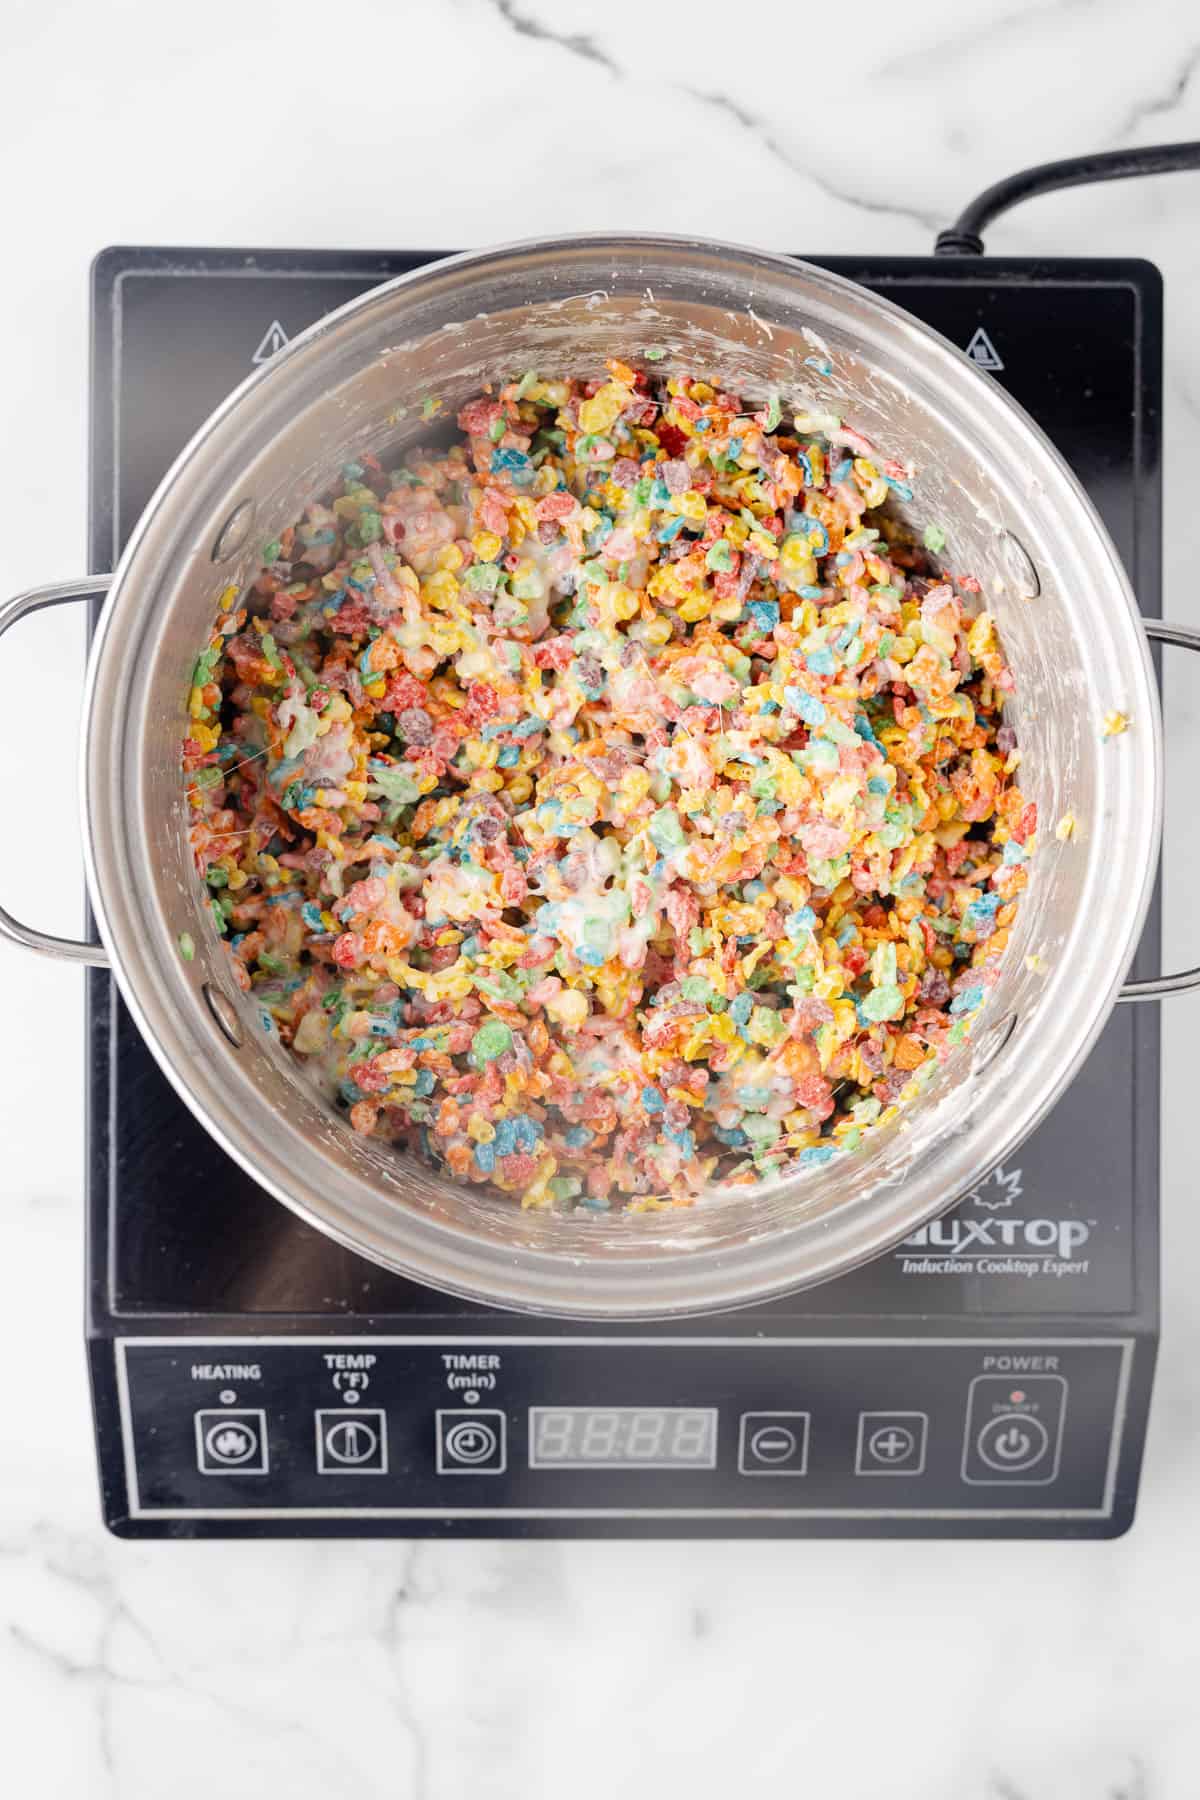 Fruity Pebble mixture in a pan.